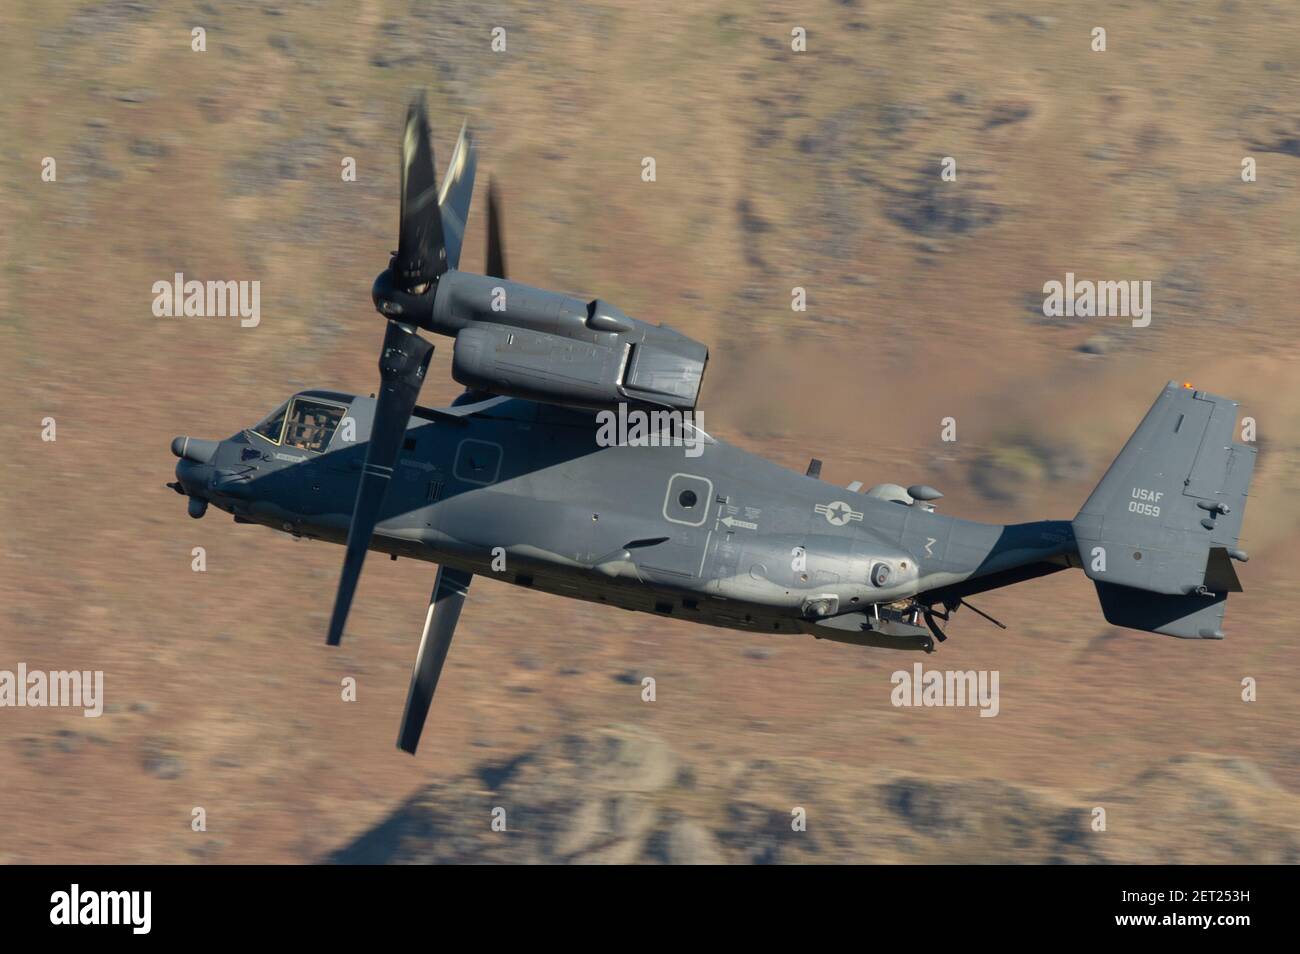 Thirlmere reservoir, near Keswick, The Lake District, Cumbria, UK. 1st March, 2021. US Airforce Bell Boeing V-22 Osprey during low level training sorties over Thirlmere reservoir, near Keswick, The Lake District, Cumbria in, on 3/1/2021. (Photo by Richard Long/News Images/Sipa USA) Credit: Sipa USA/Alamy Live News Credit: Sipa USA/Alamy Live News Stock Photo